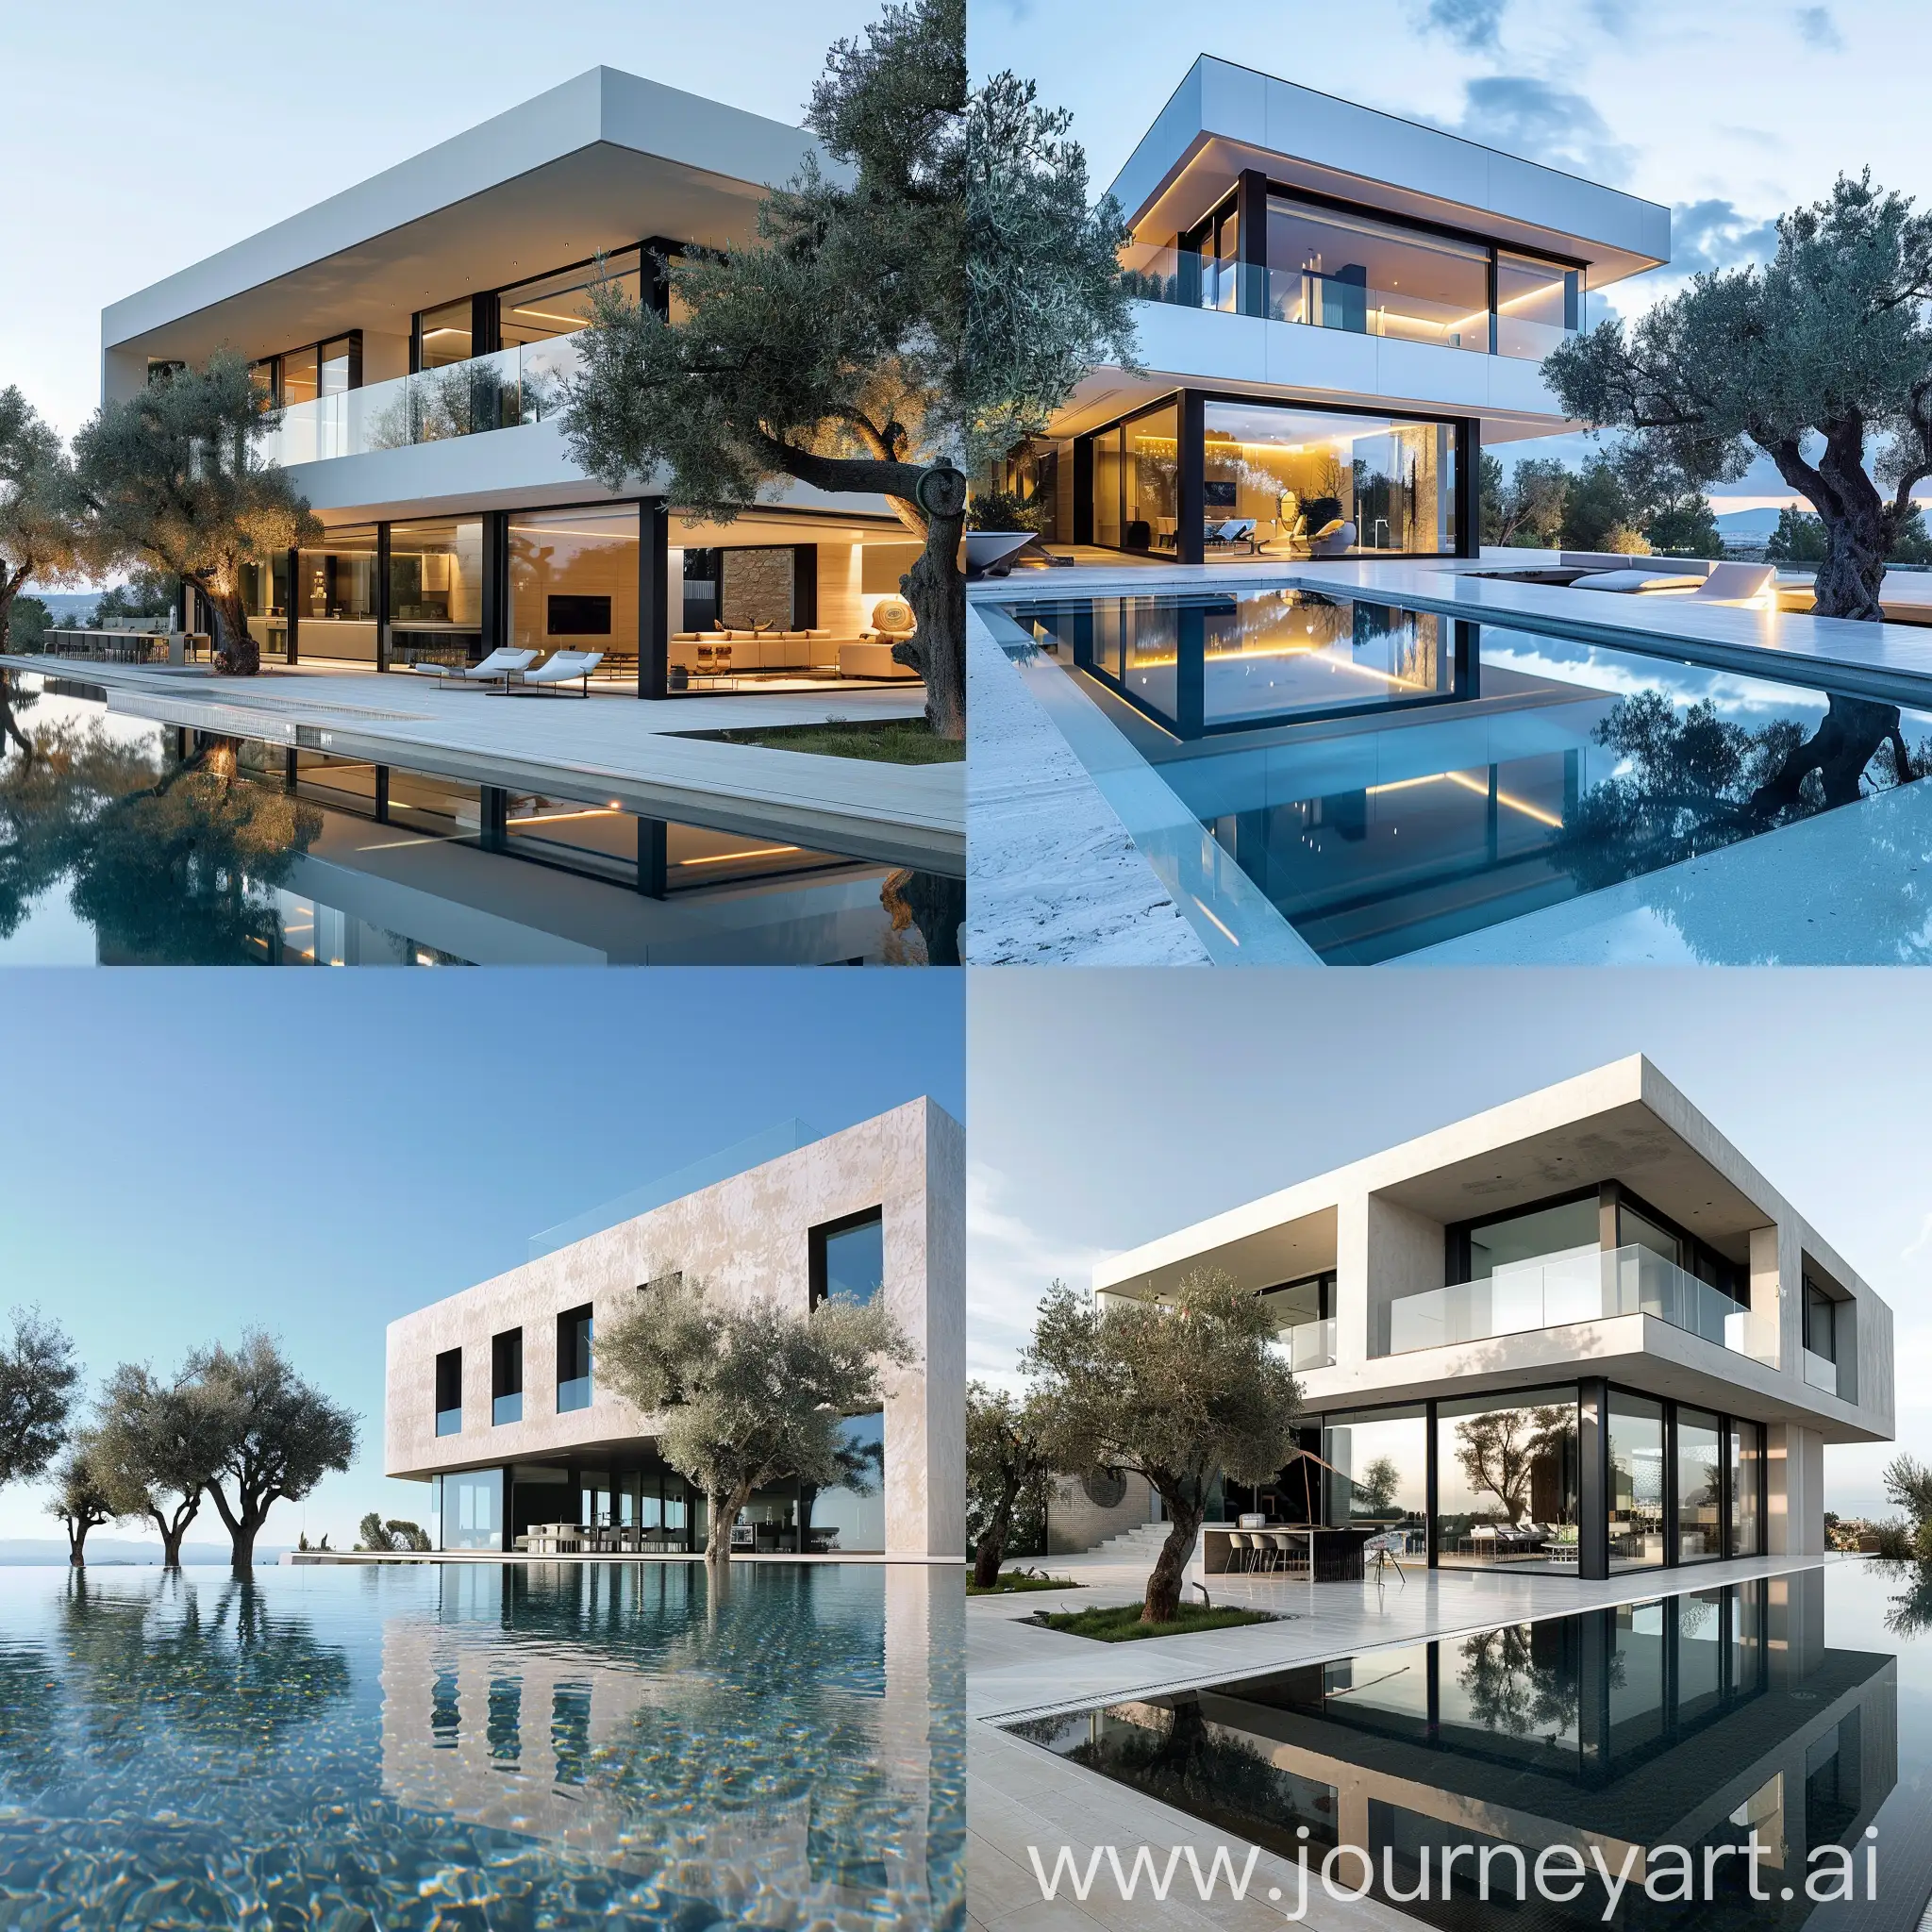 Modern luxury Spanish house, in a modern Mediterranean style, located on the coast, among olive trees, with large windows and an infinity pool, with a minimalist design, open-plan living areas, glass walls, roof terrace, Frank Gehry, Zaha Hadid style, clear lines, clear focus